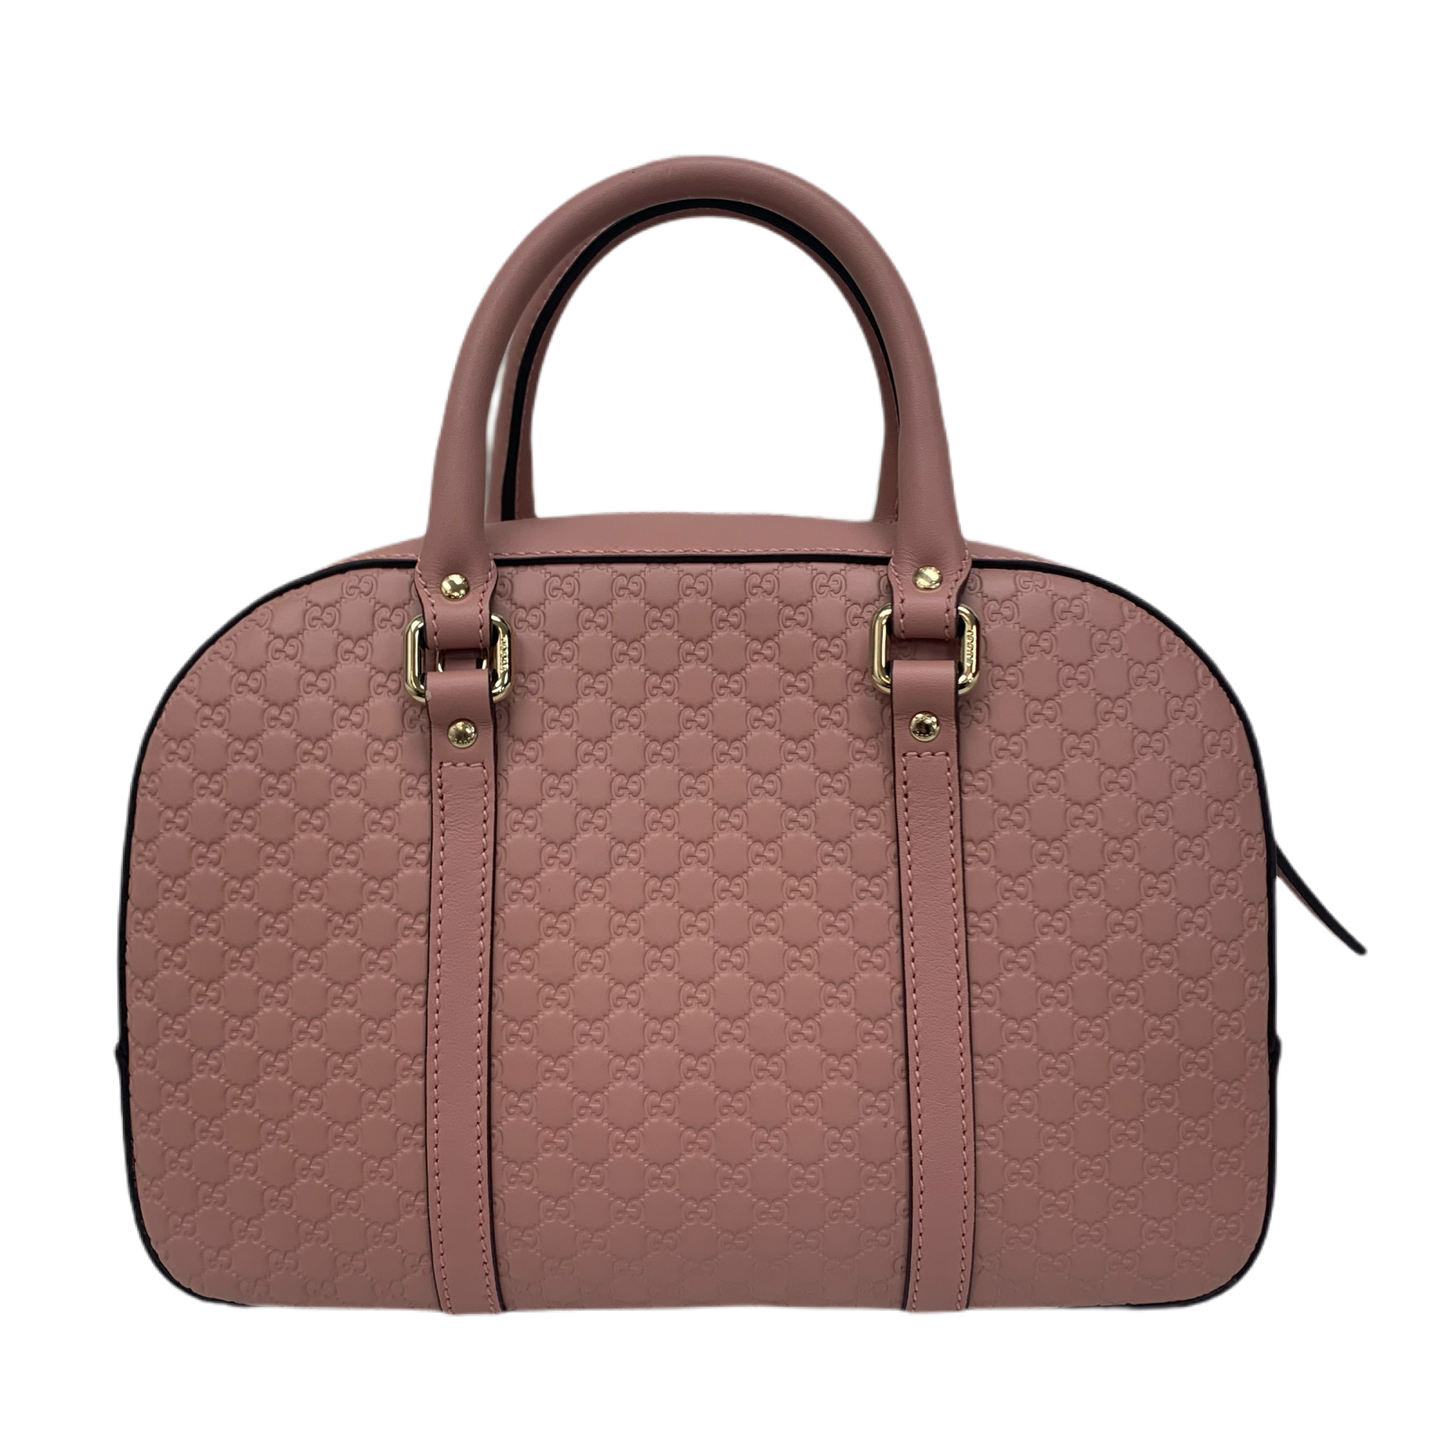 Gucci Pink Leather Embossed Satchel